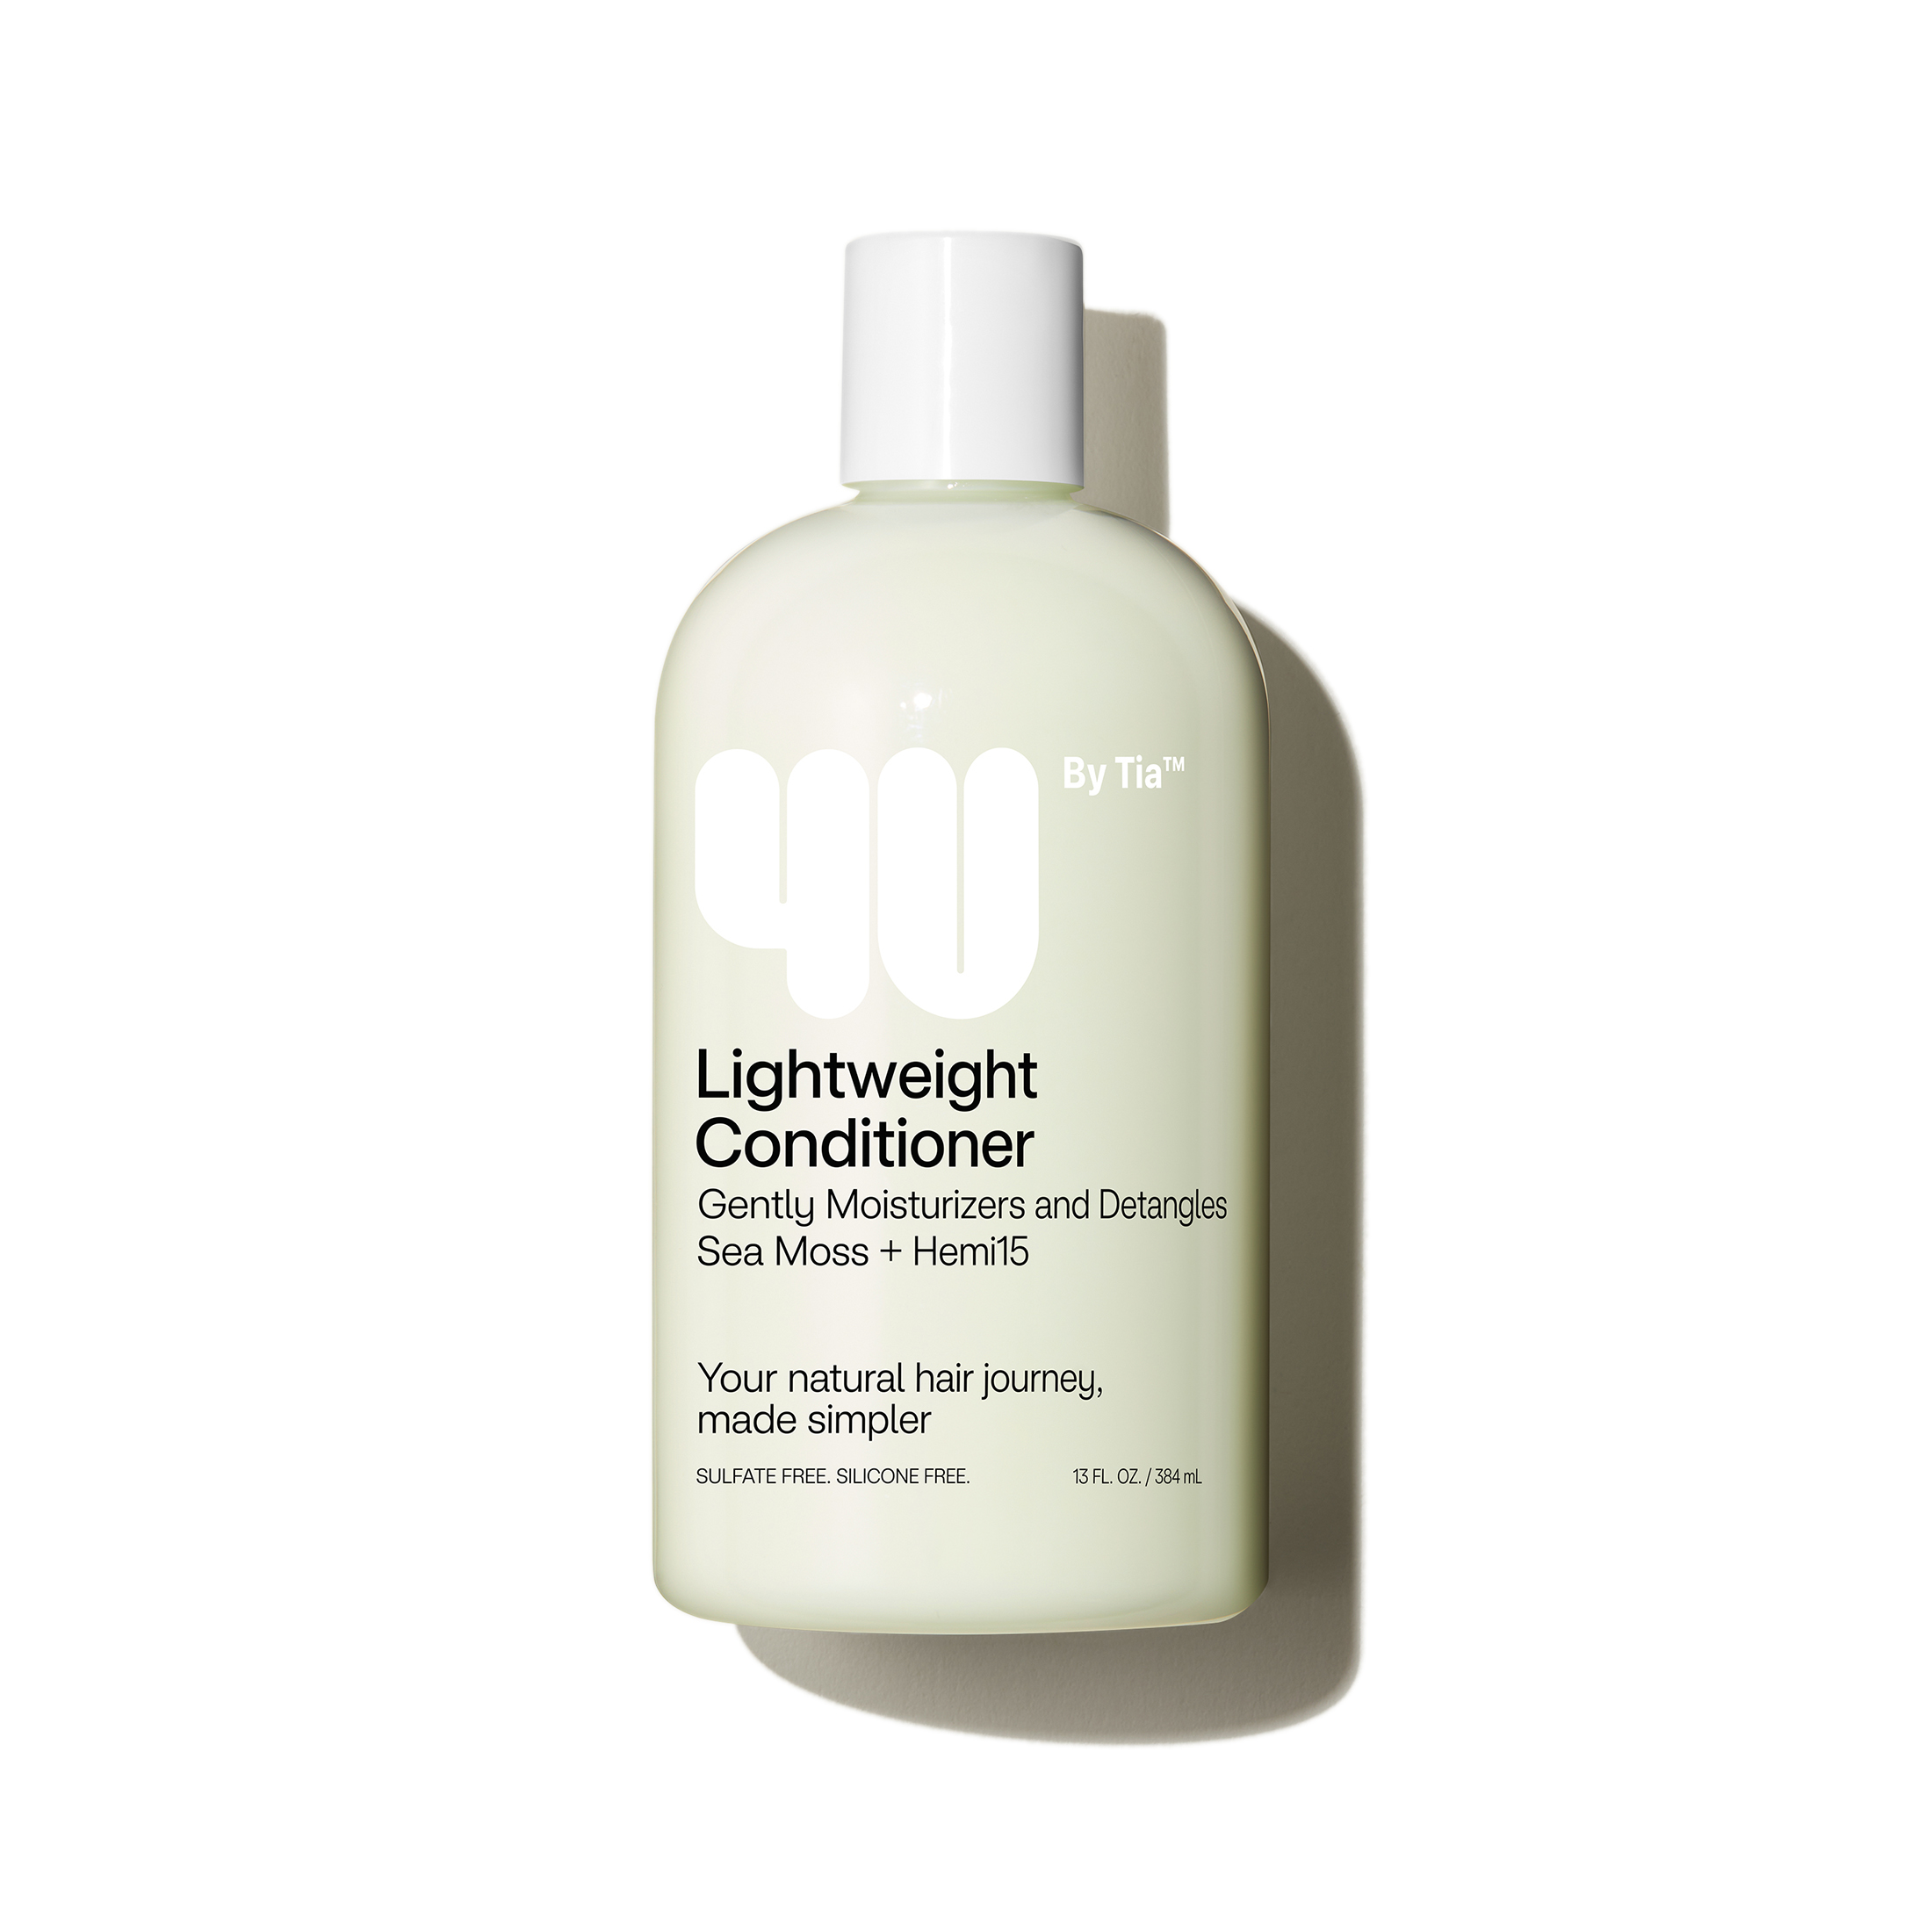 4U by Tia Lightweight Detangling Conditioner with Sea Moss and Hemi15, 13 fl oz - image 1 of 10